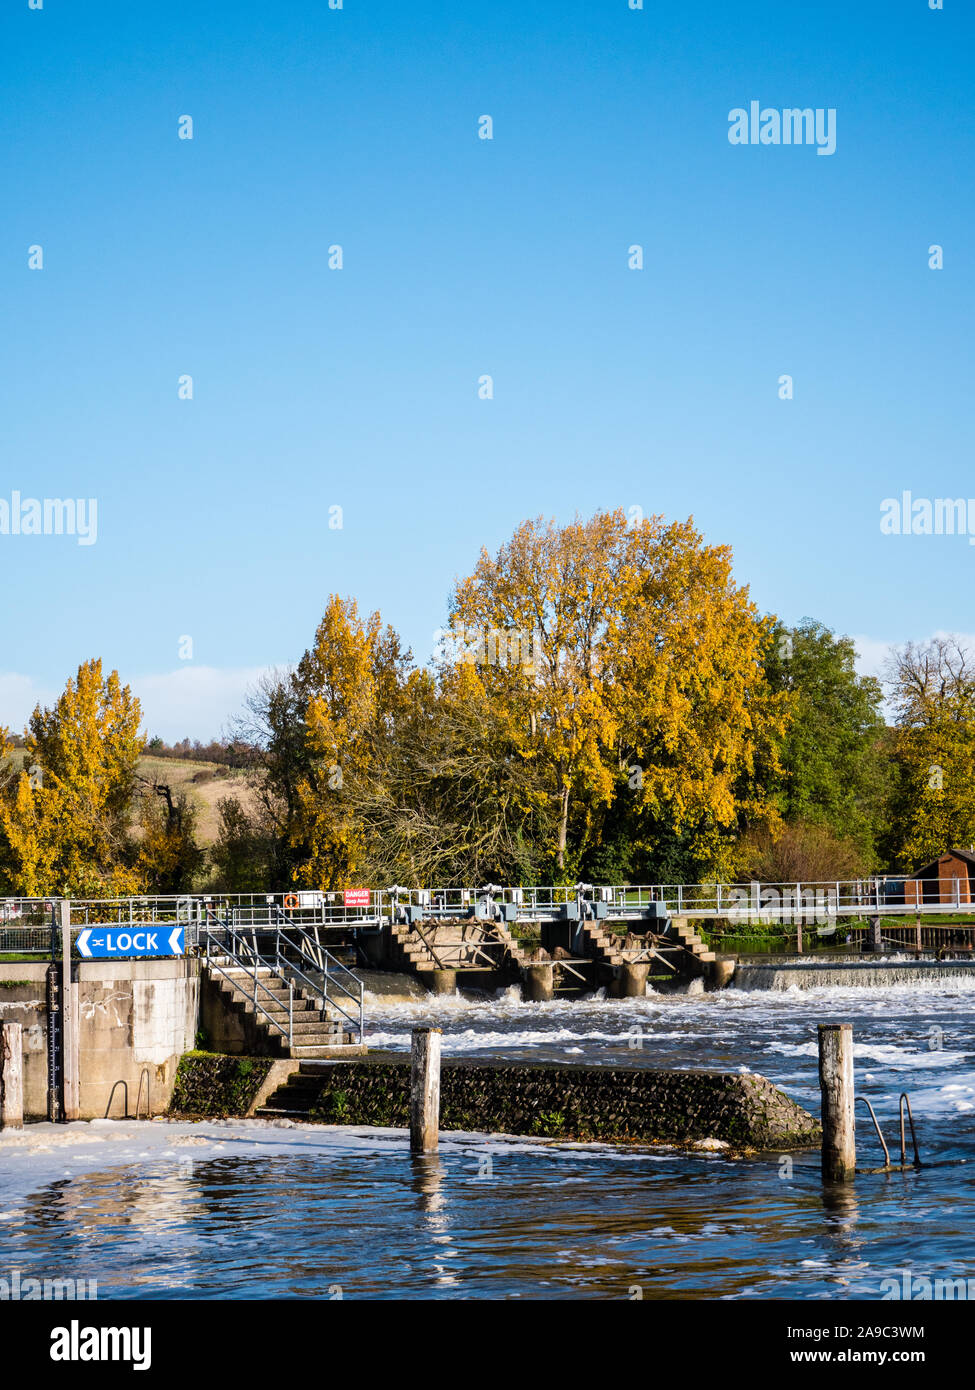 High Water at Autumn Mapledurham Lock, Purley on Thames, River Thames, Berkshire, England, UK, GB. Stock Photo